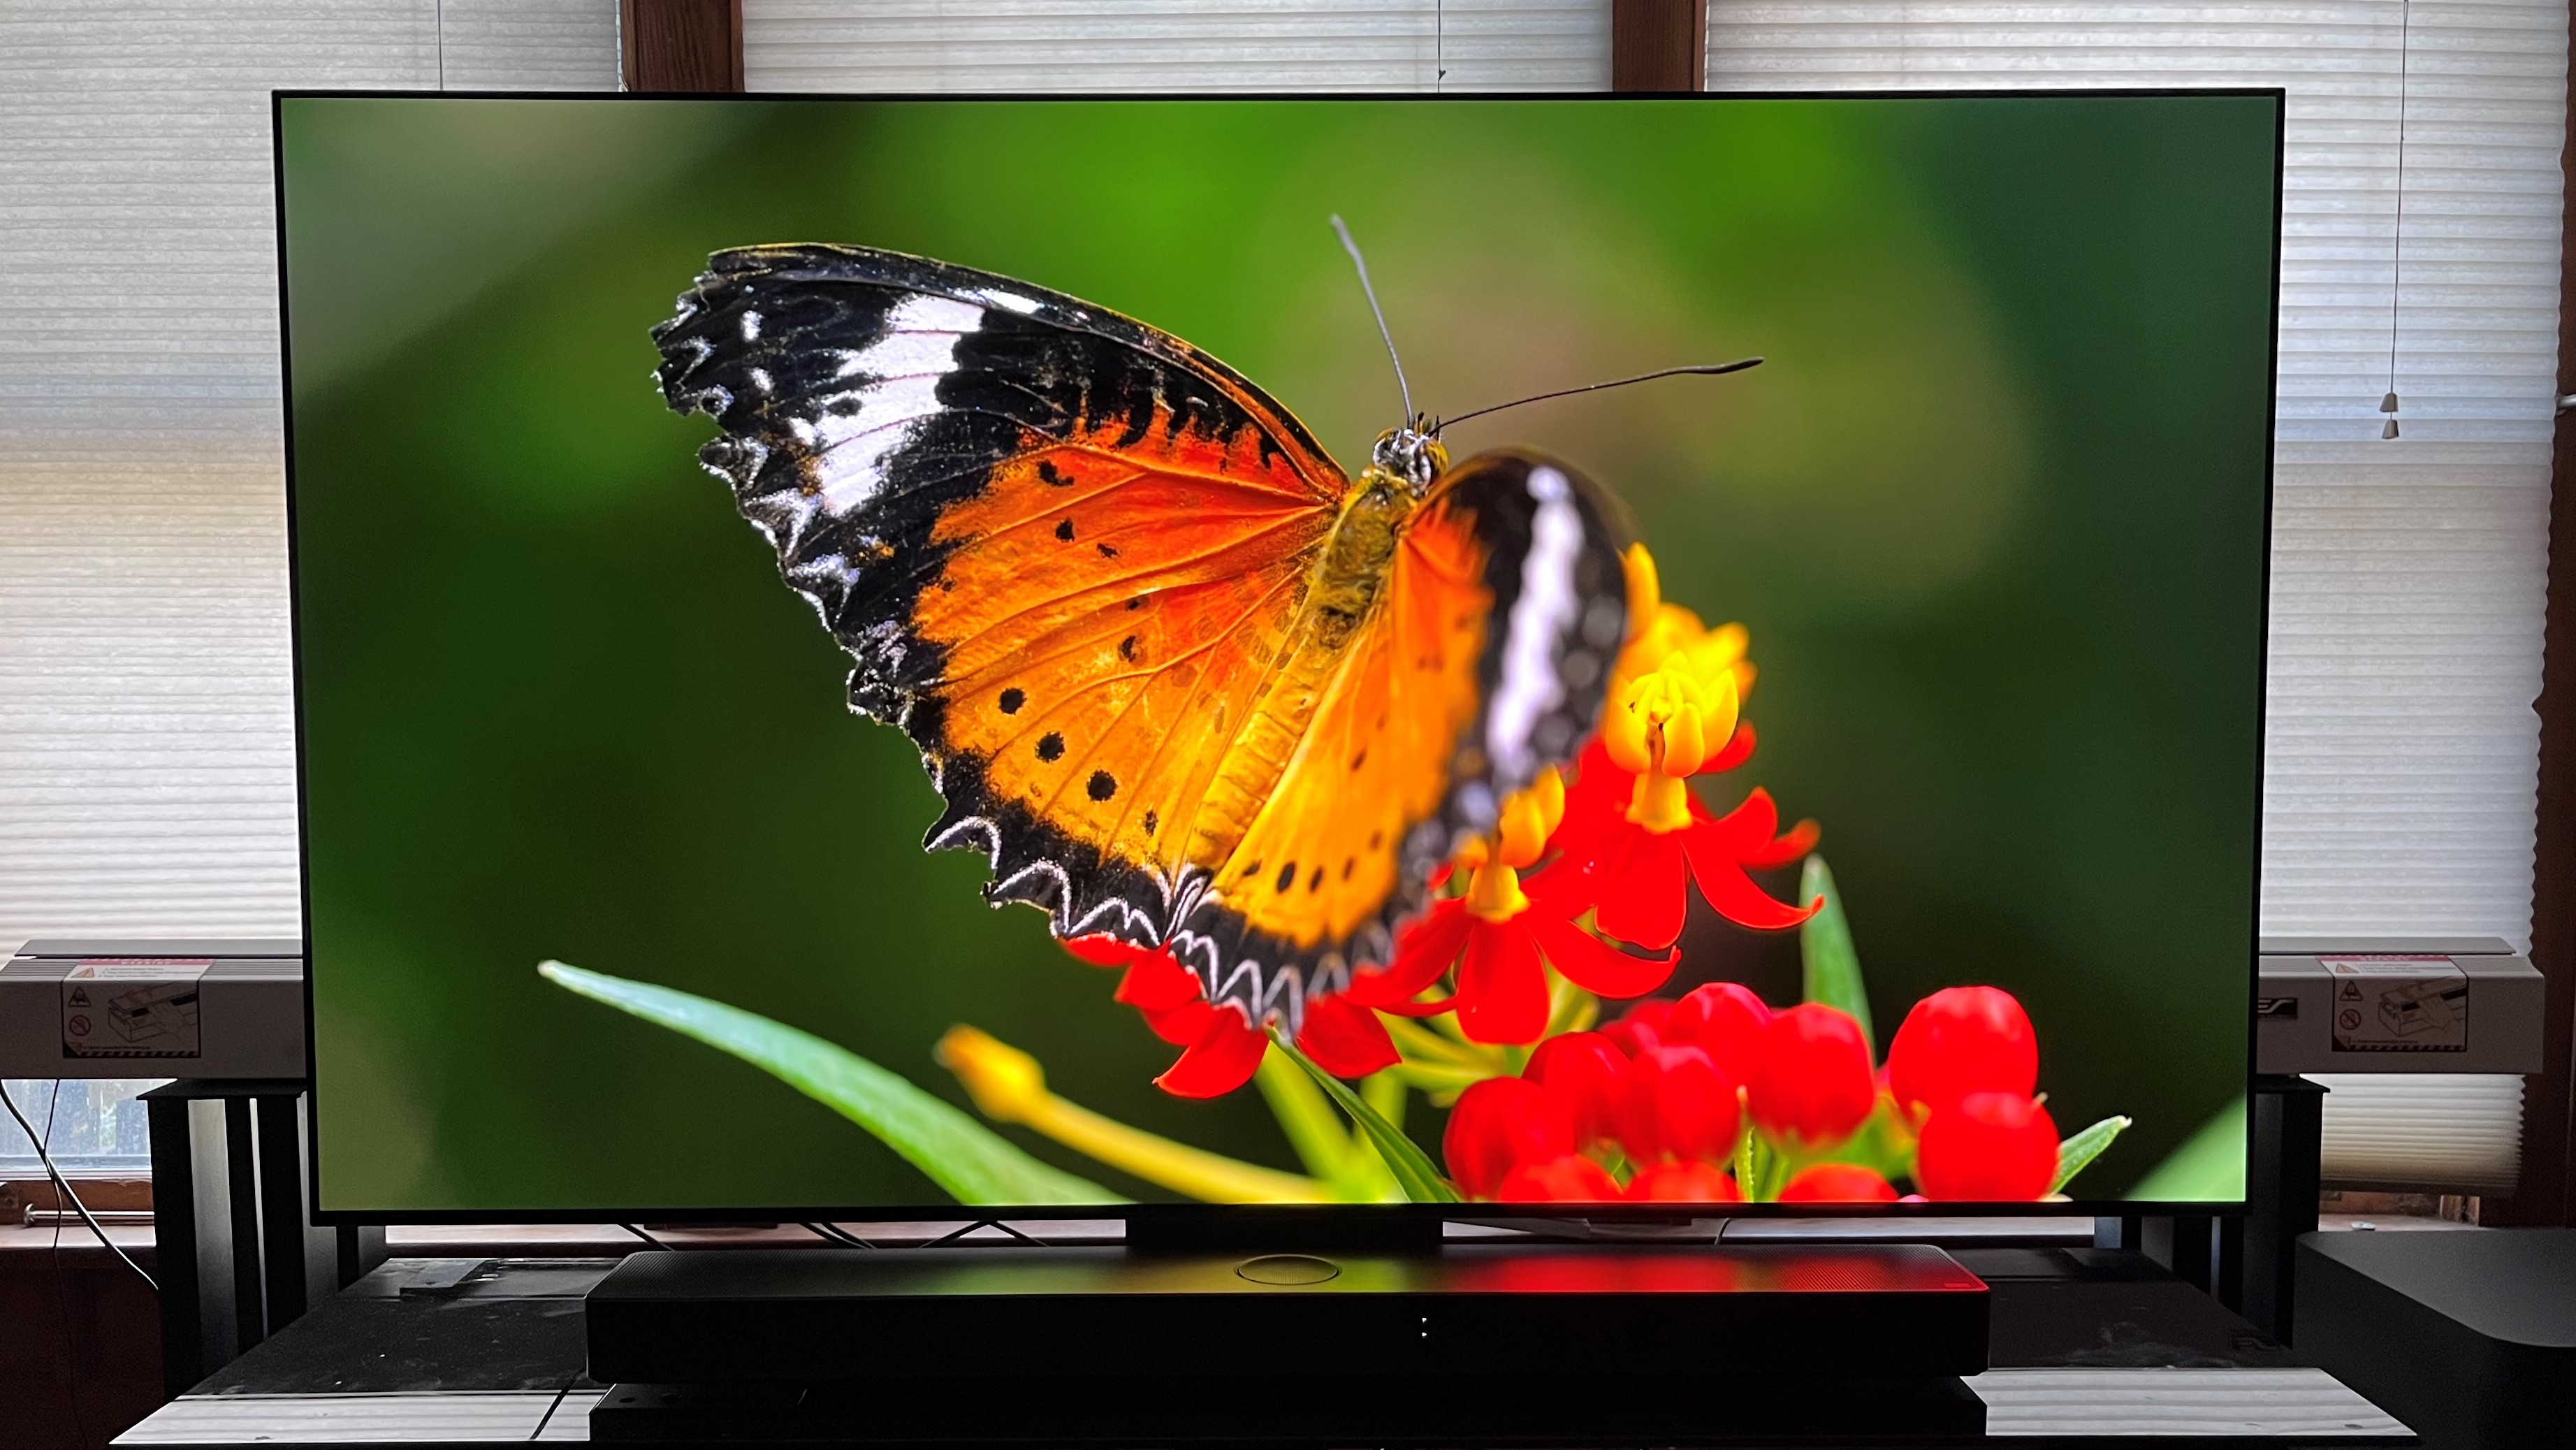 LG C3 OLED TV showing orange butterfly onscreen